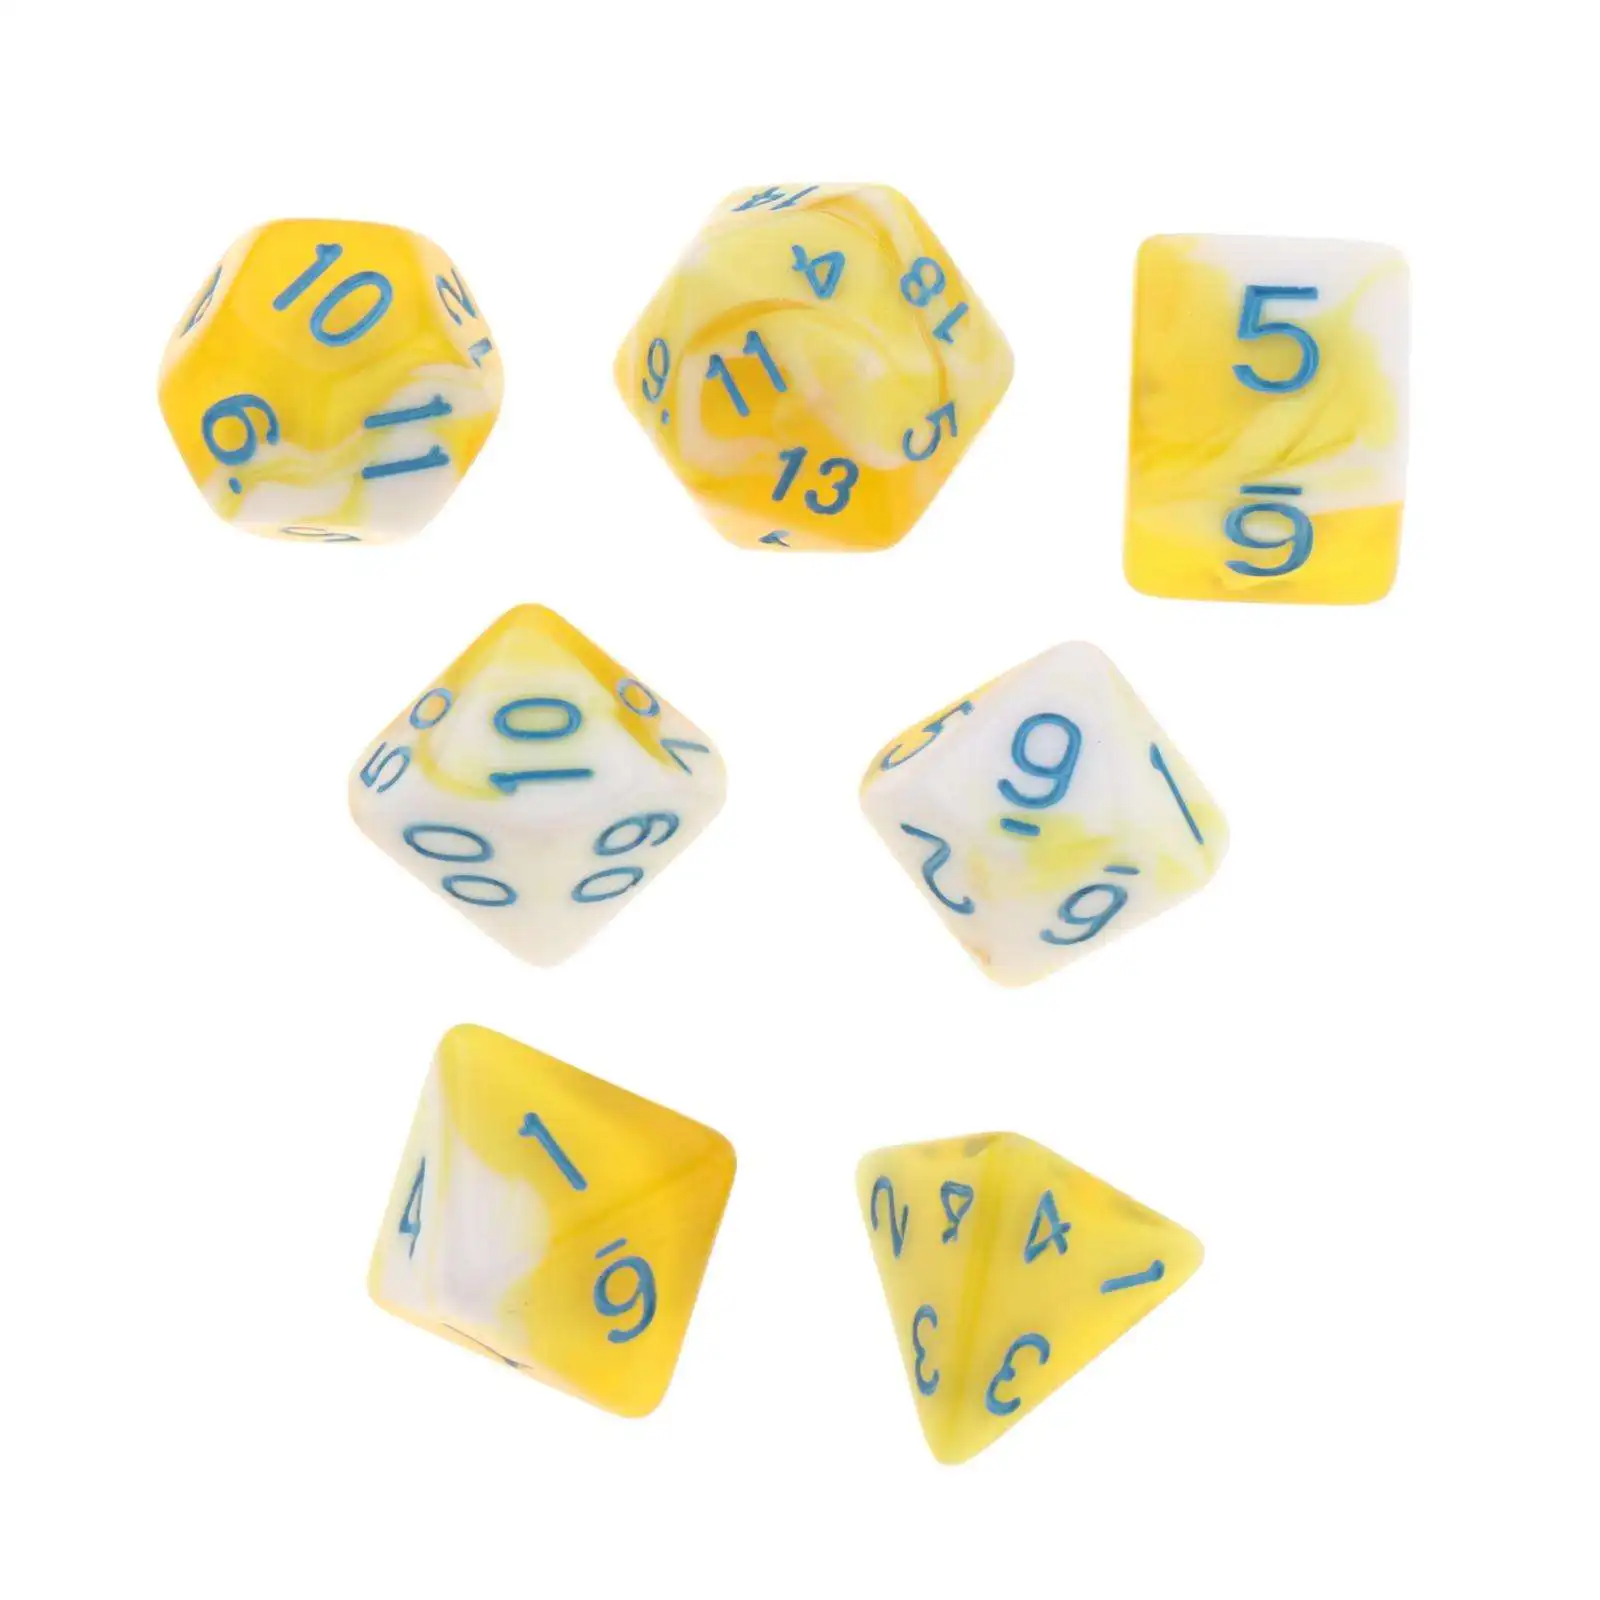 Acrylic Polyhedral Dice Table Games Multi-Sided Party Supply Role Playing Dice for Dnd